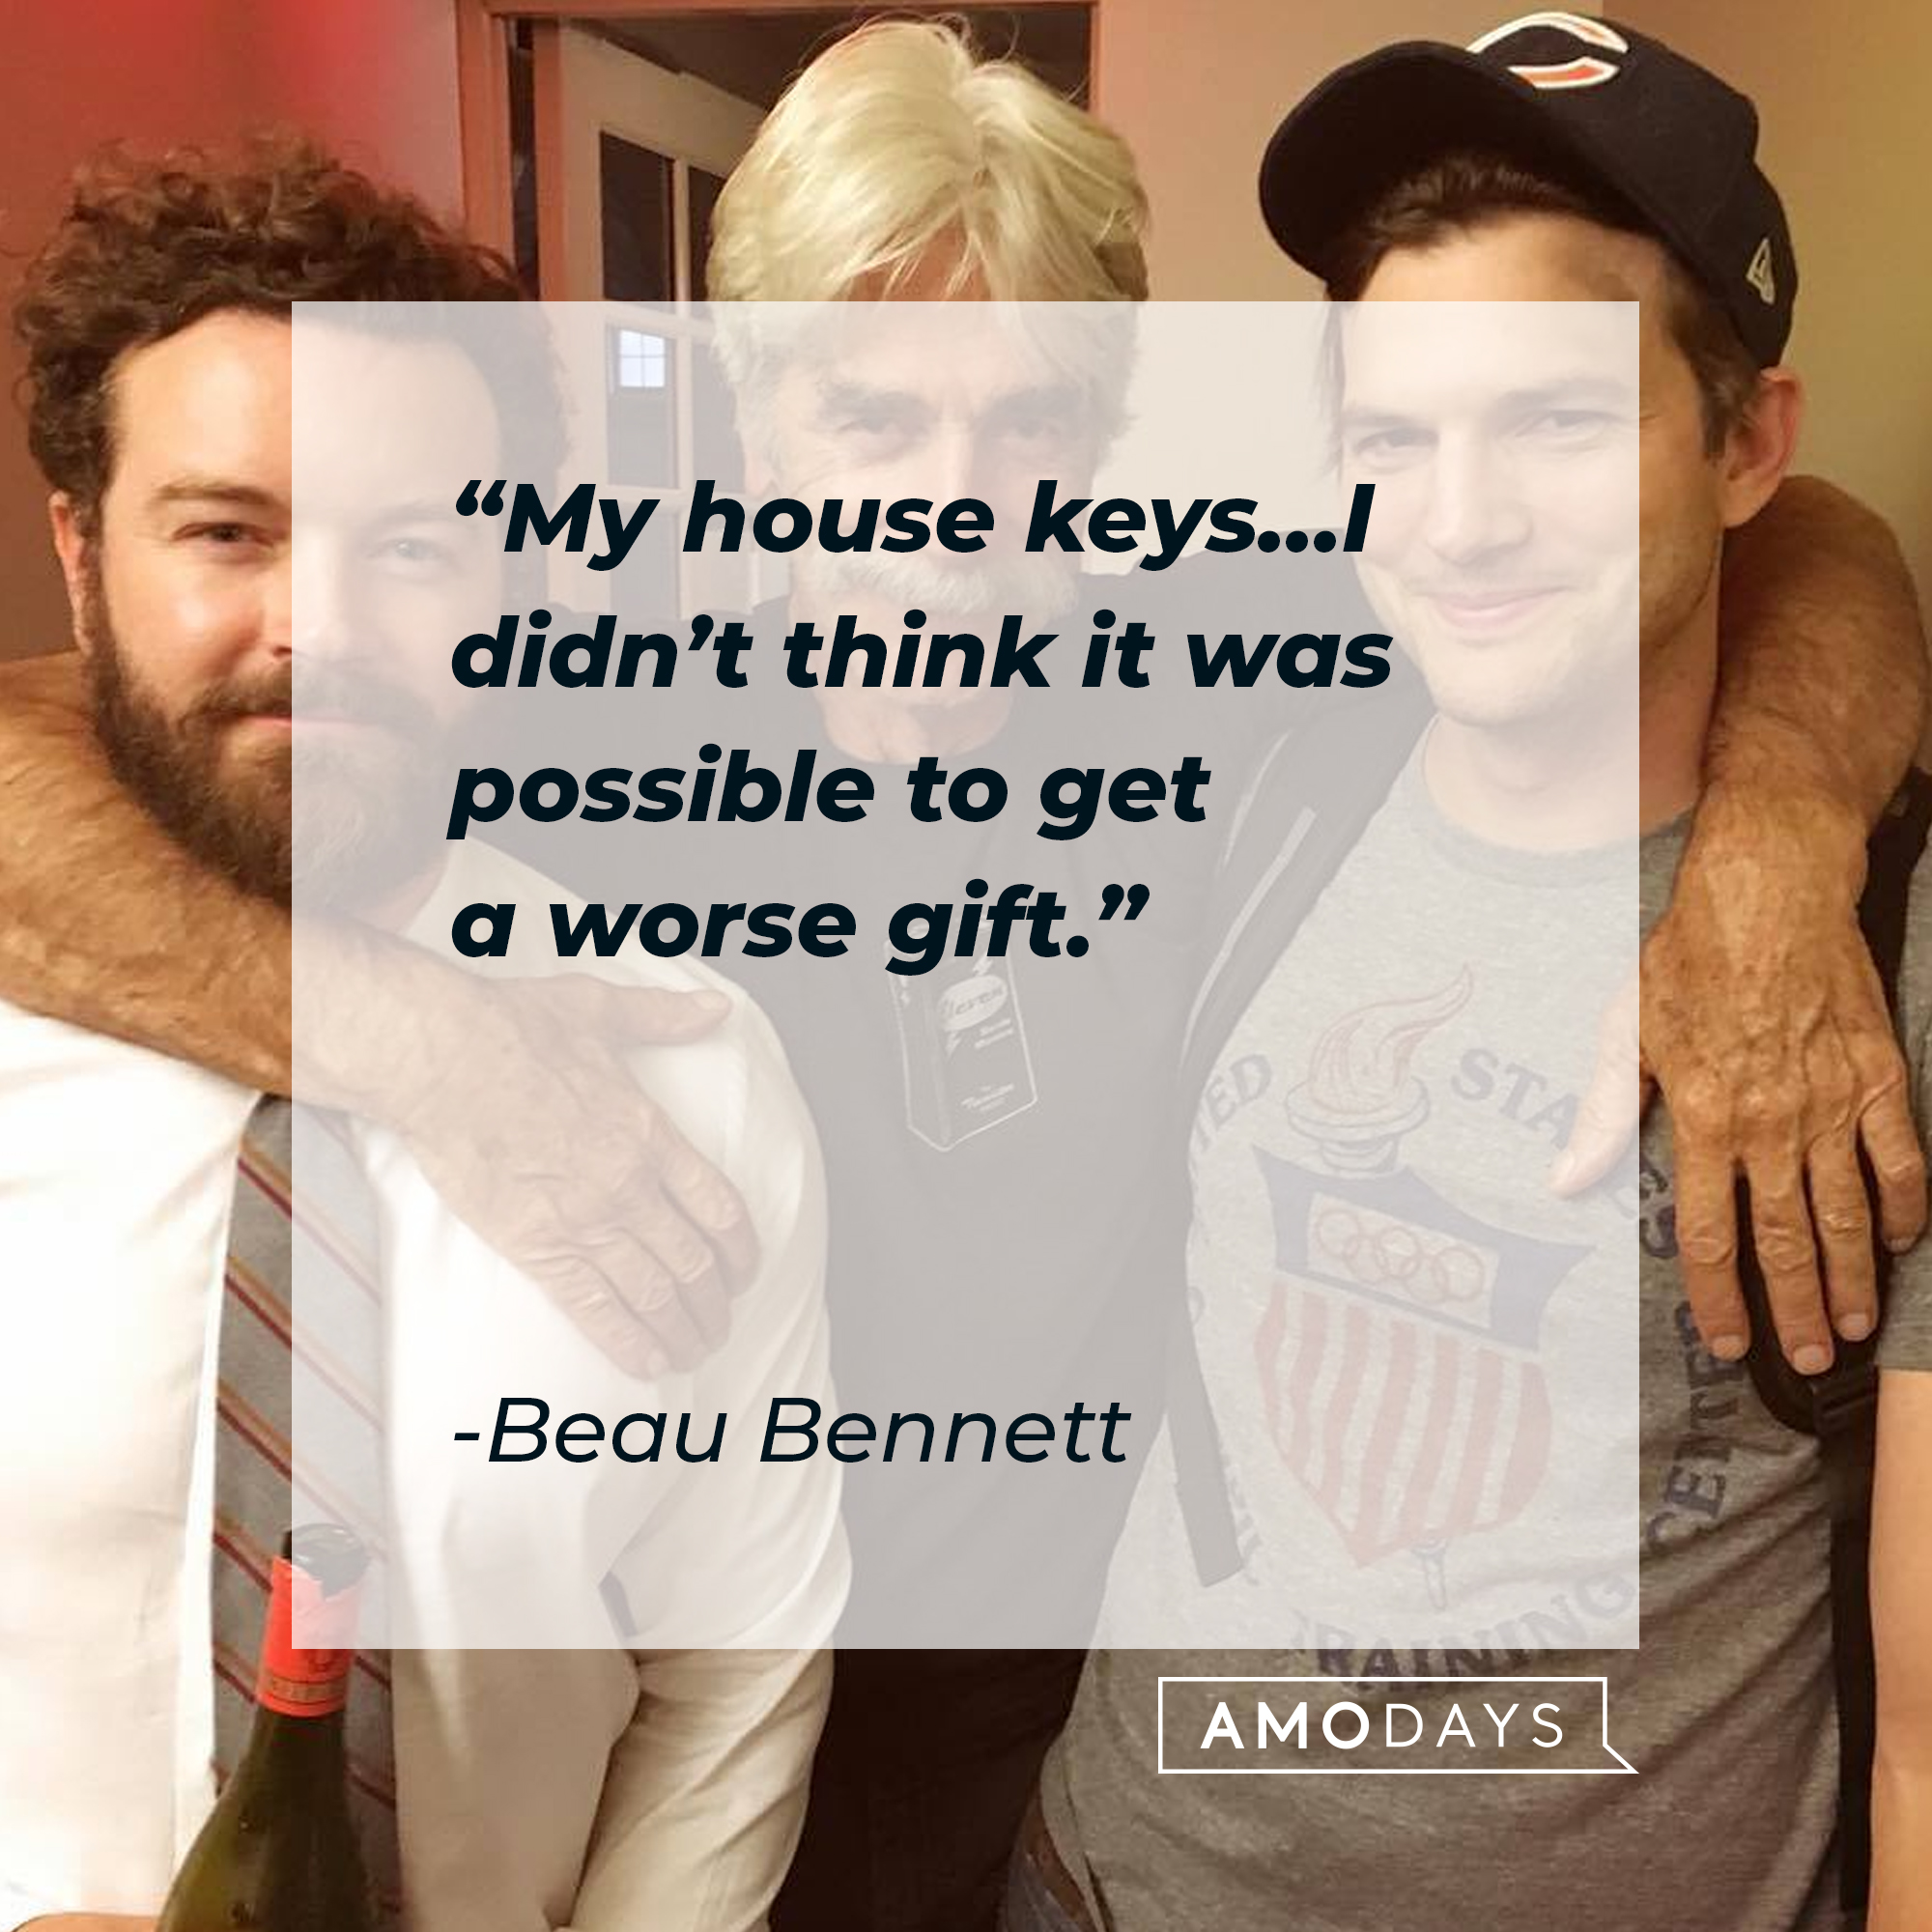 Beau Bennett and his two sons, with his quote: “My house keys…I didn’t think it was possible to get a worse gift.” | Source: facebook.com/TheRanchNetflix